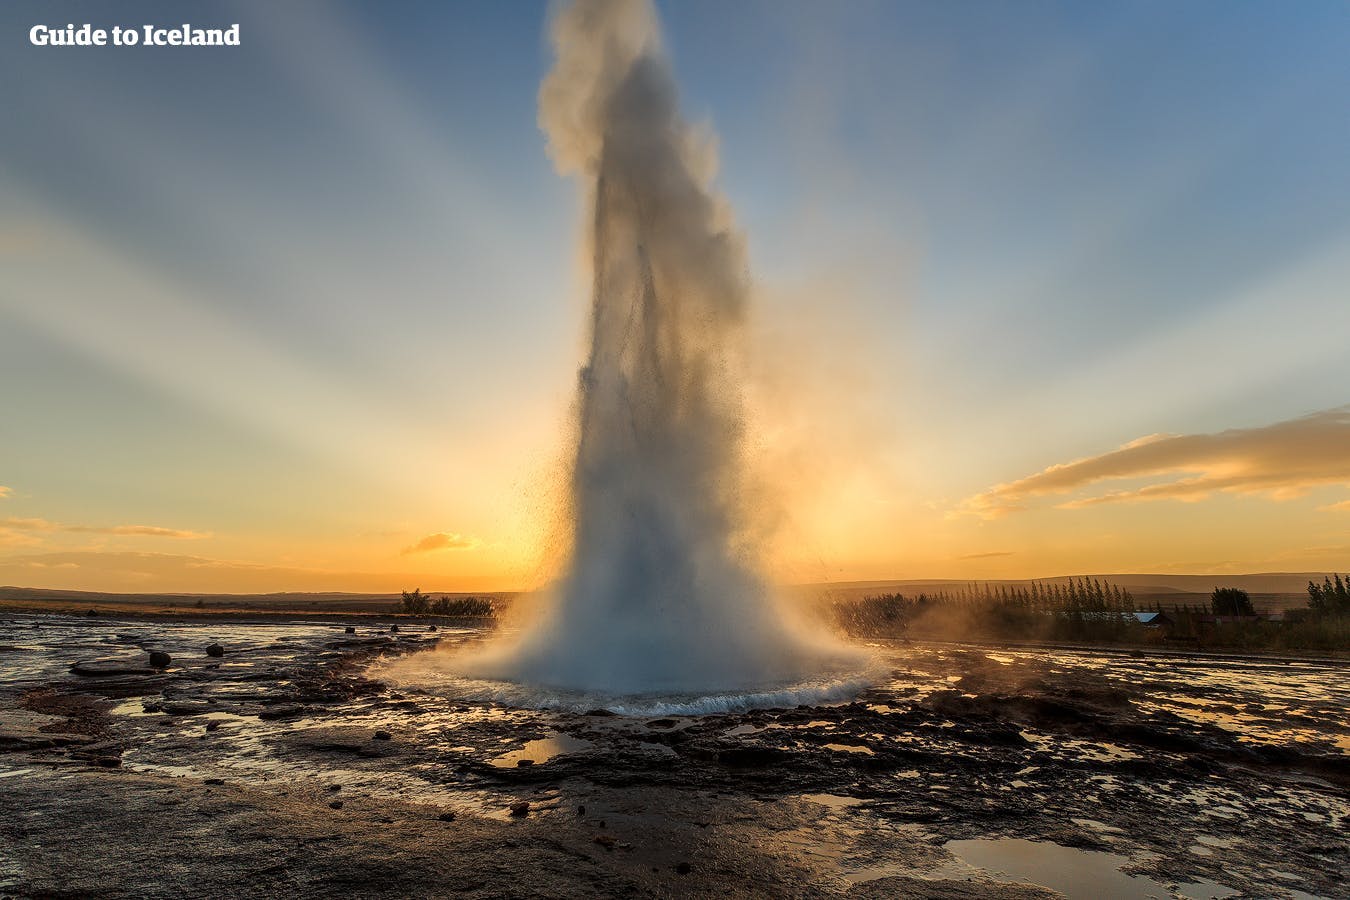 Visit the Golden Circle and watch as the mighty geyser, Stokkur, erupts.